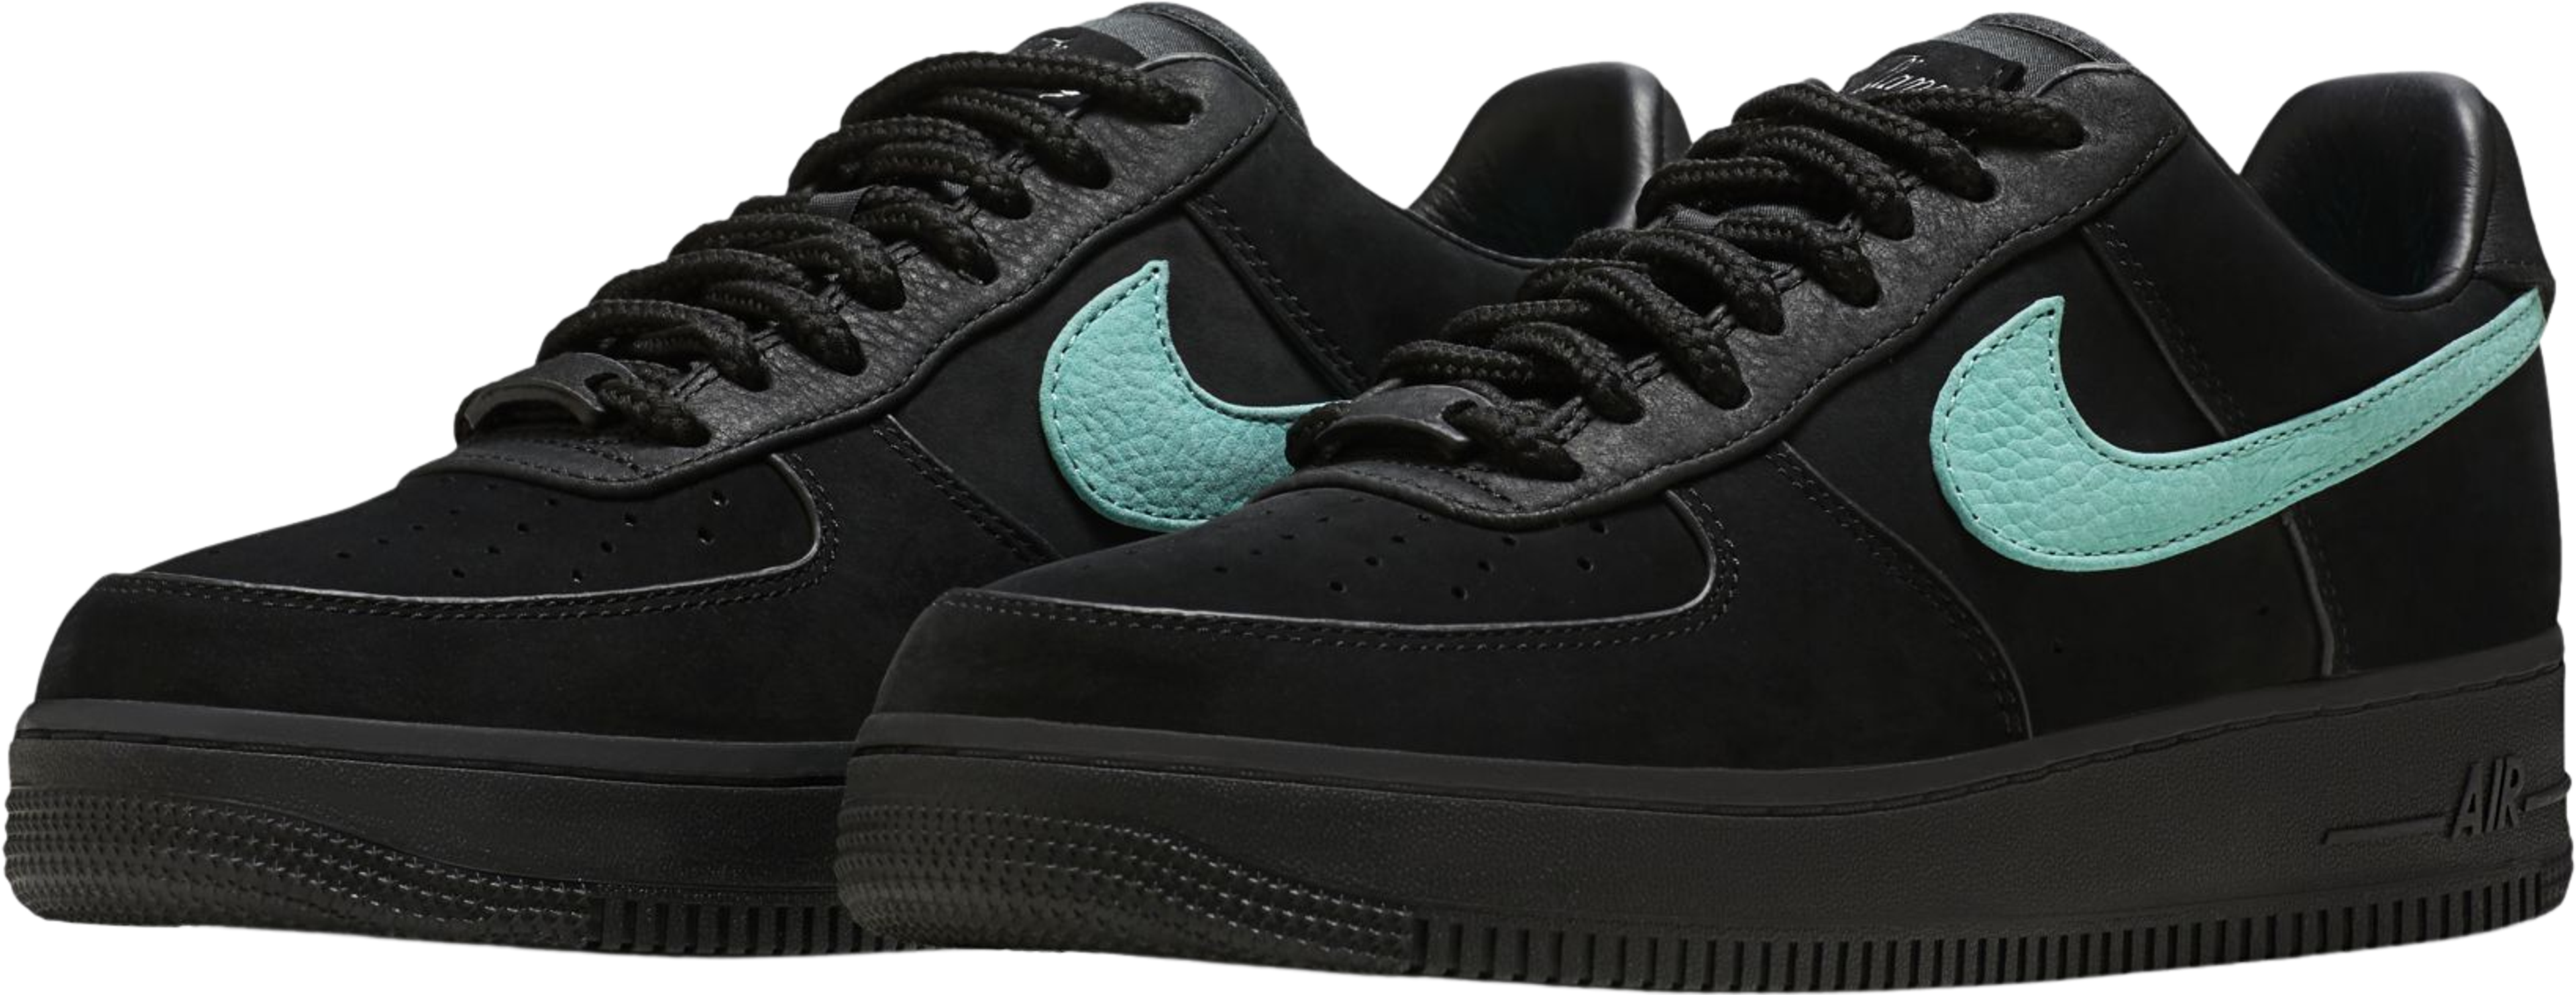 Tiffany & Co. x Nike Launches Exclusive Air Force 1 Low Sneakers